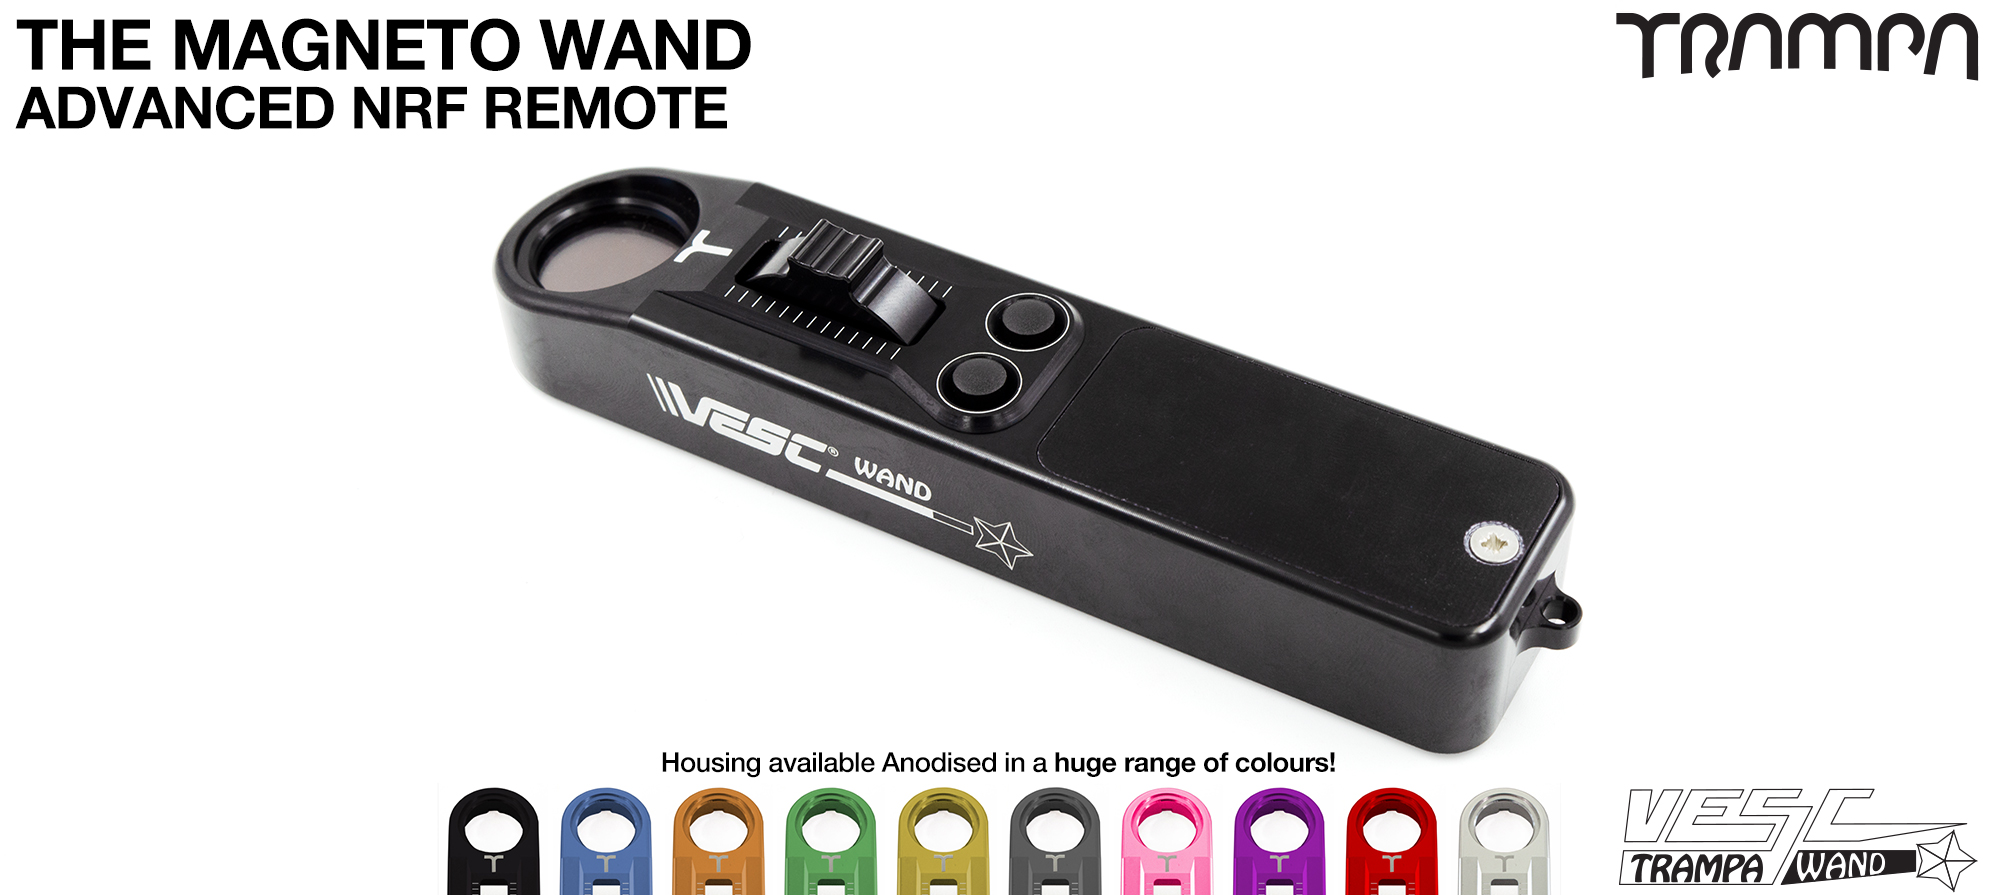 The WAND - with Cruise control & loads of other features! (+£100)